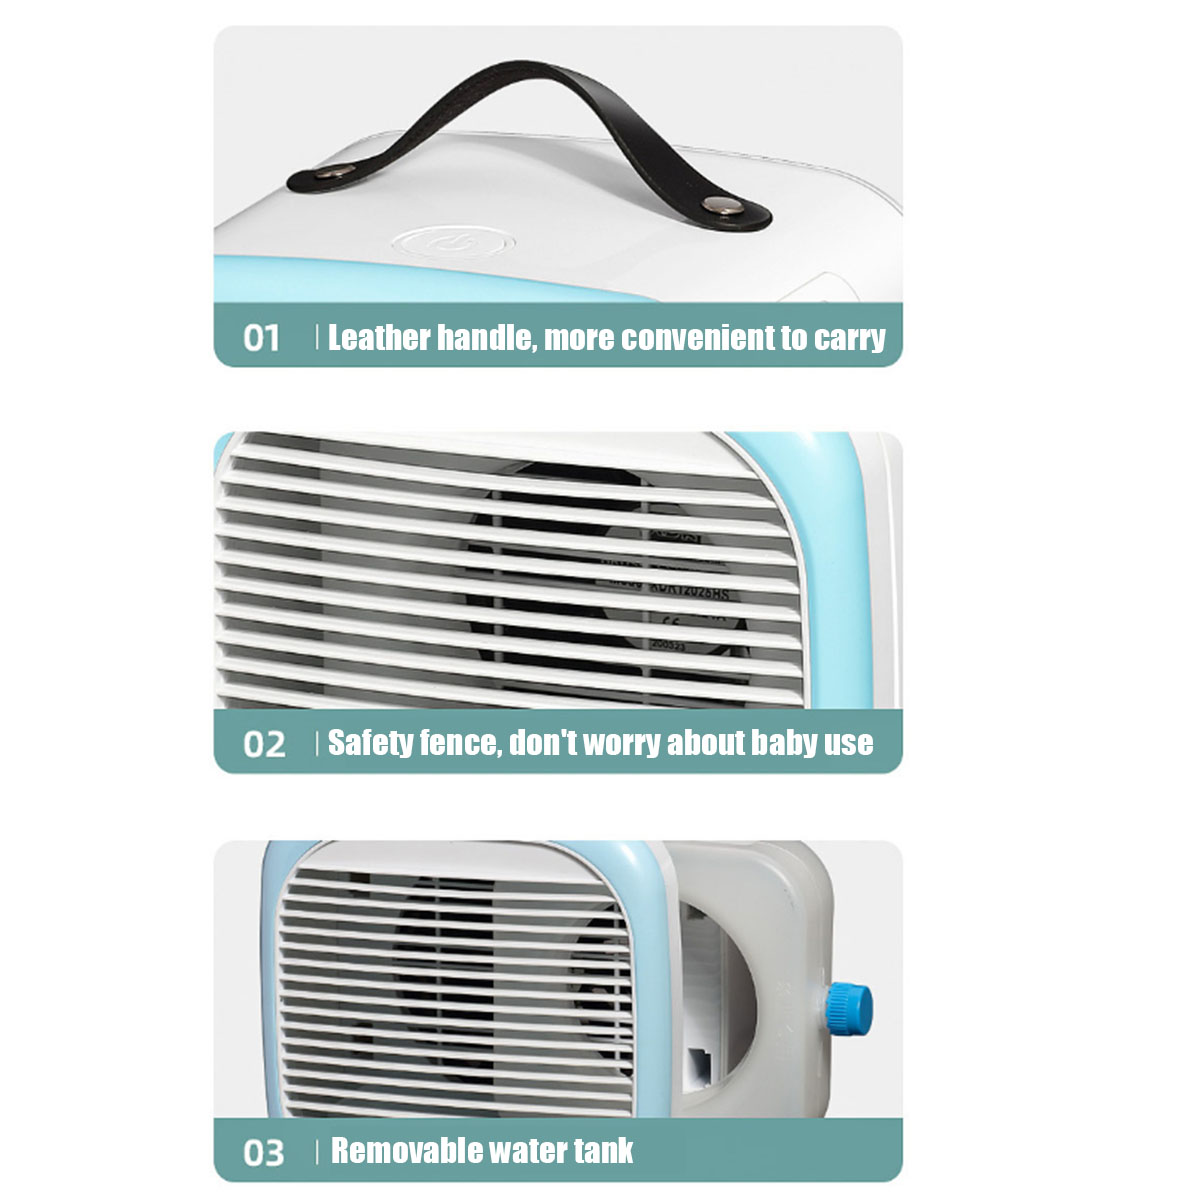 USB-Mini-Air-Conditioner-Fan-Personal-Air-Cooler-Desktop-Cooling-Fan-Air-Purifier-Humidifier-for-Hom-1783906-5